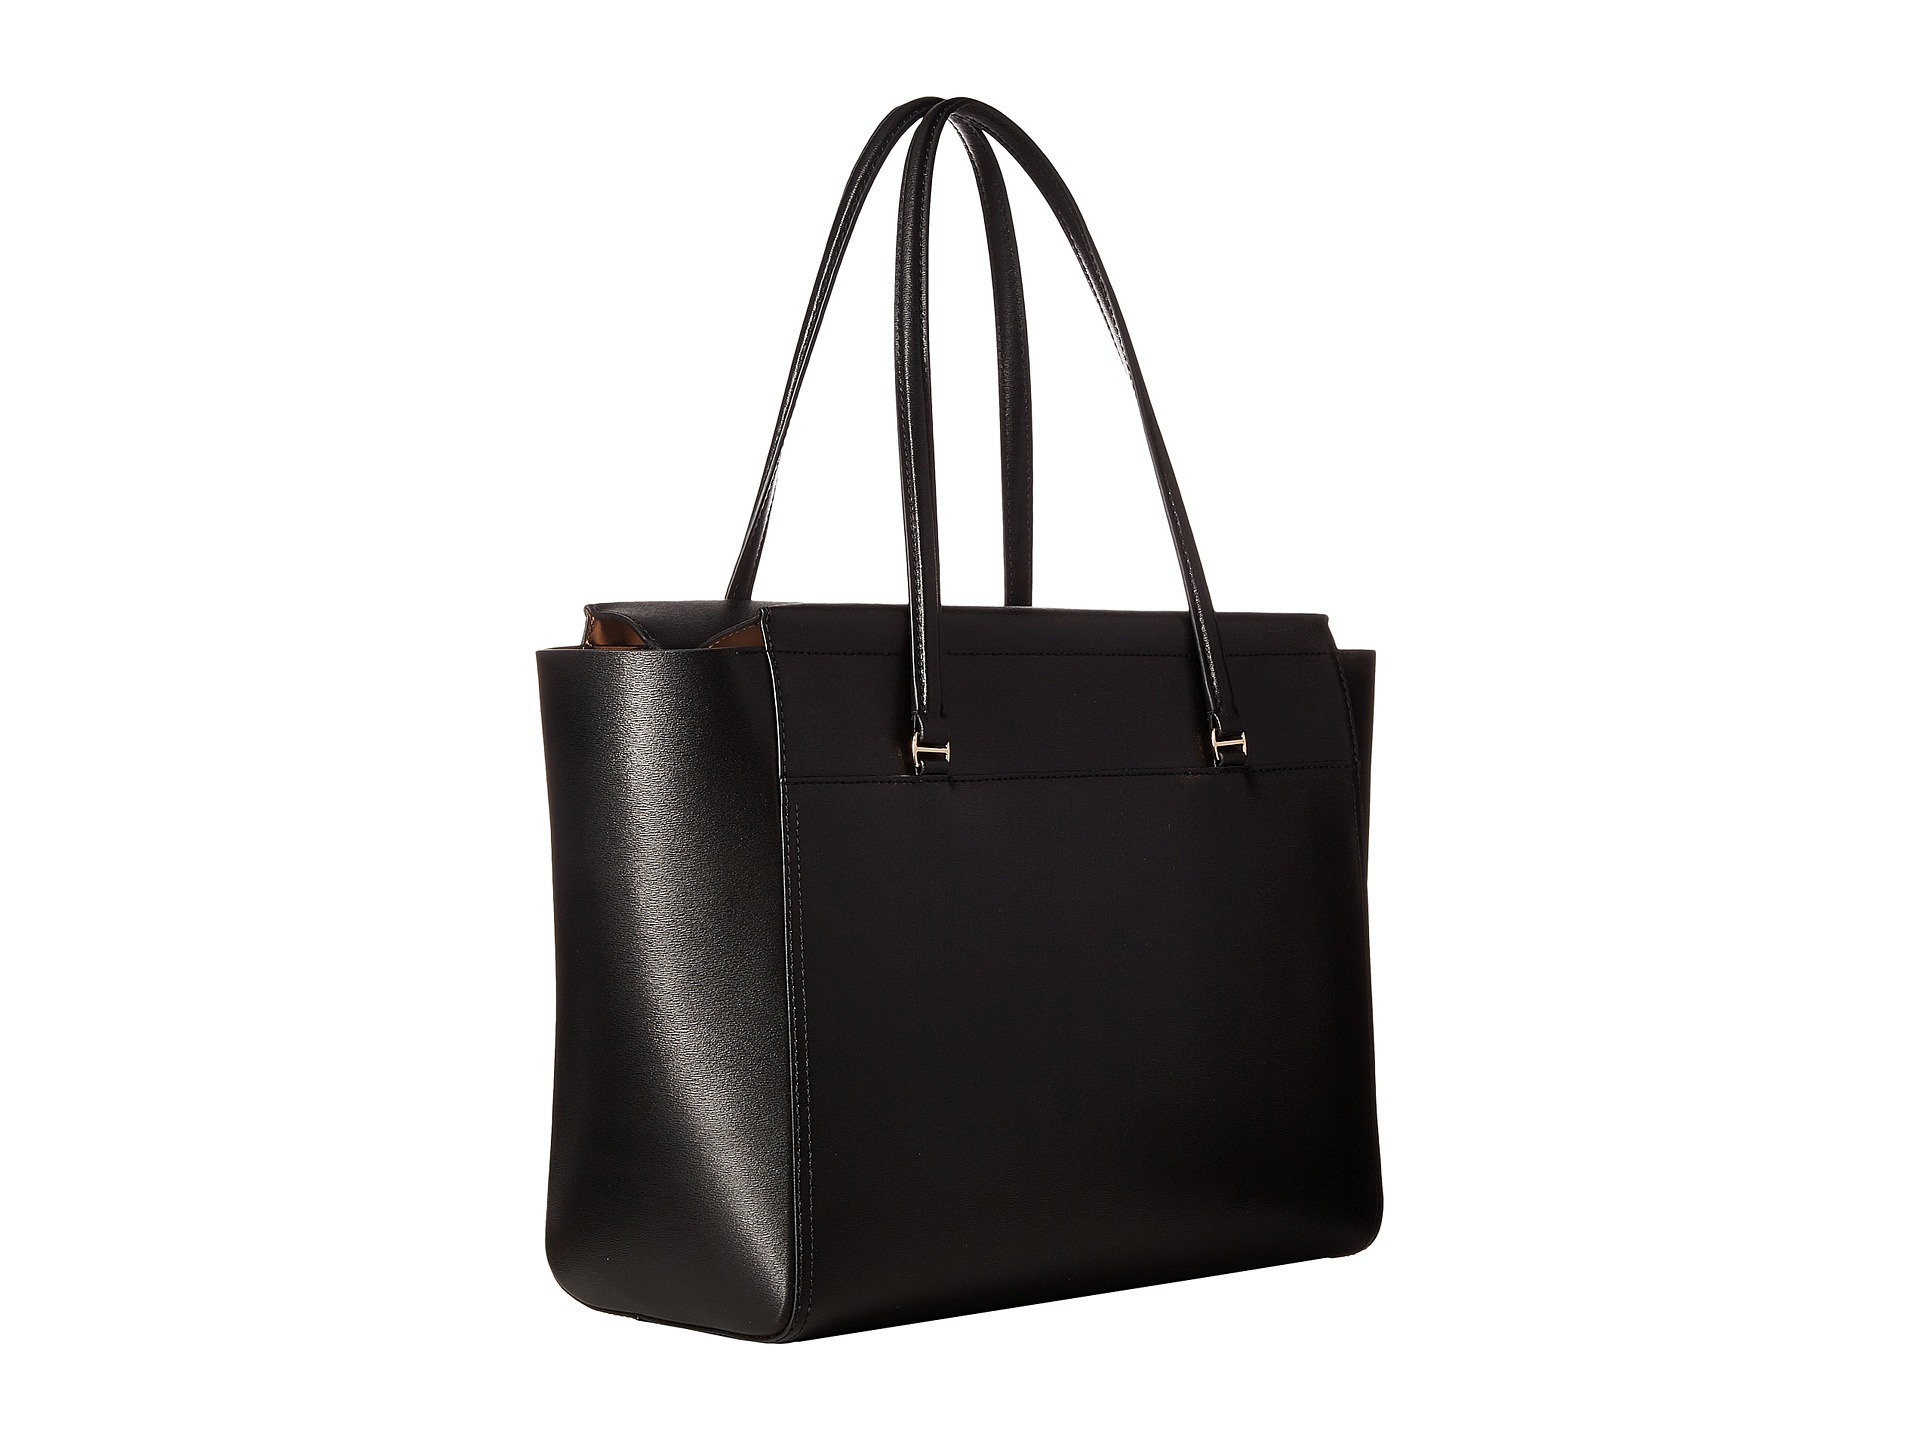 Tory Burch Parker Tote at Zappos.com